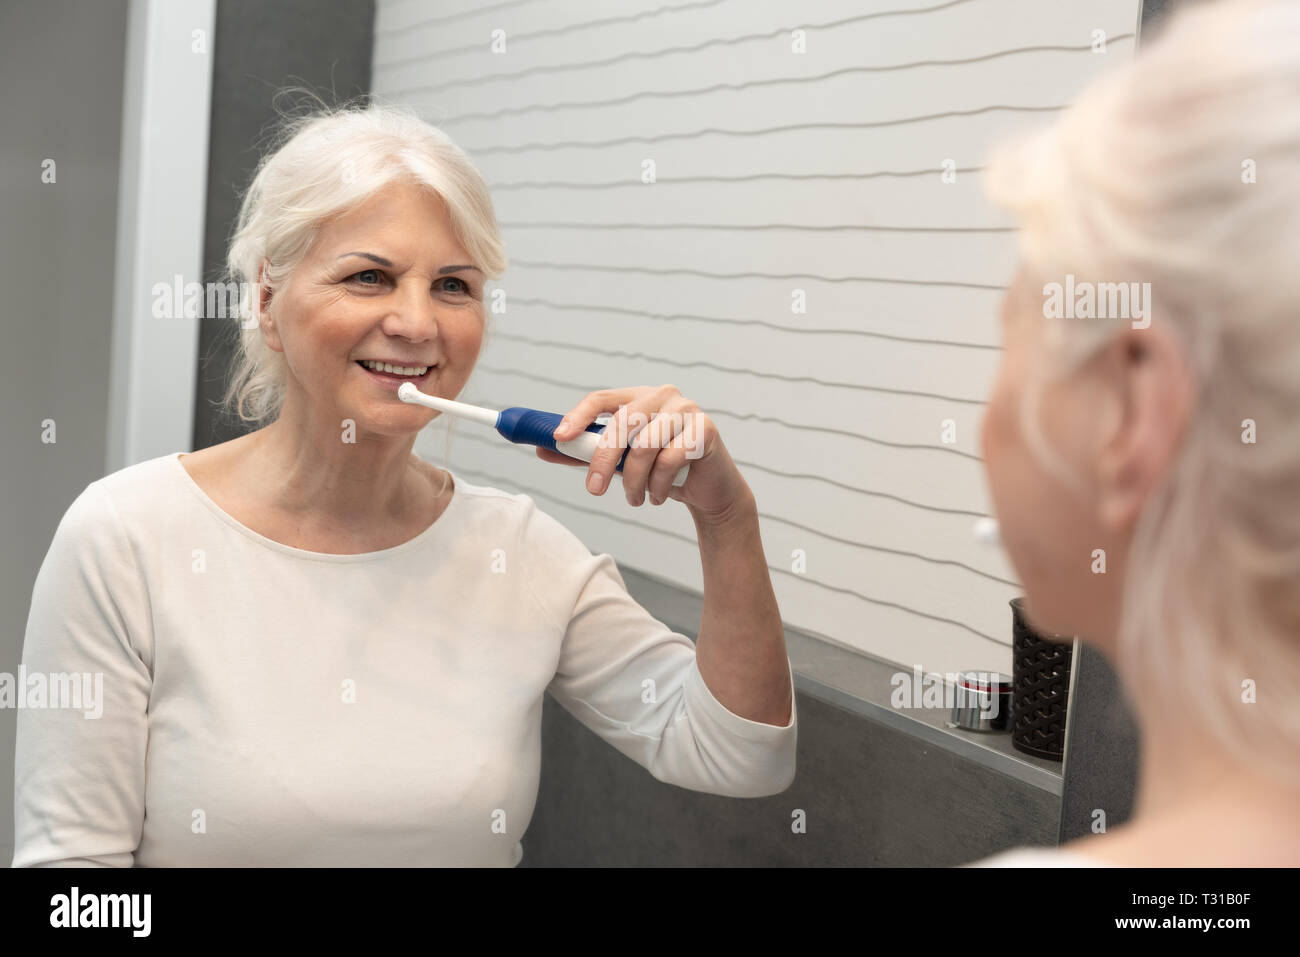 Cute mature woman brushing teeth. Electric toothbrush used by senior woman. Stock Photo